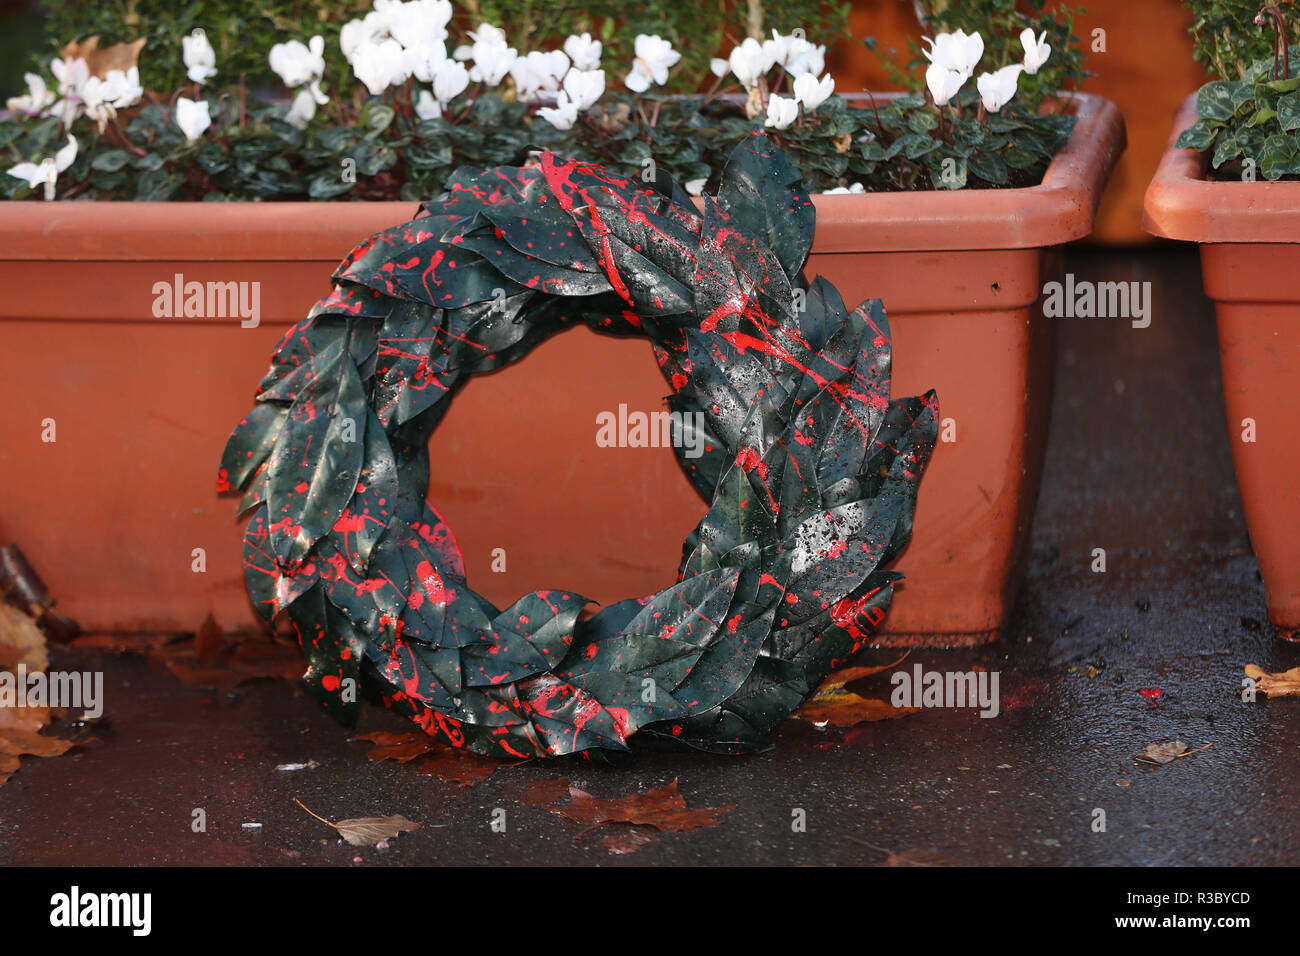 A laurel wreath left by the All Blacks Rugby Team in honor of Donegal man Dave Gallaher who died at Passchendaele in 1917 beside, a WW1 comemorative statue entitled The Haunting Soldier is cleaned after it was vandalized with red paint last night in Dublin's St. Stephen's Green Stock Photo